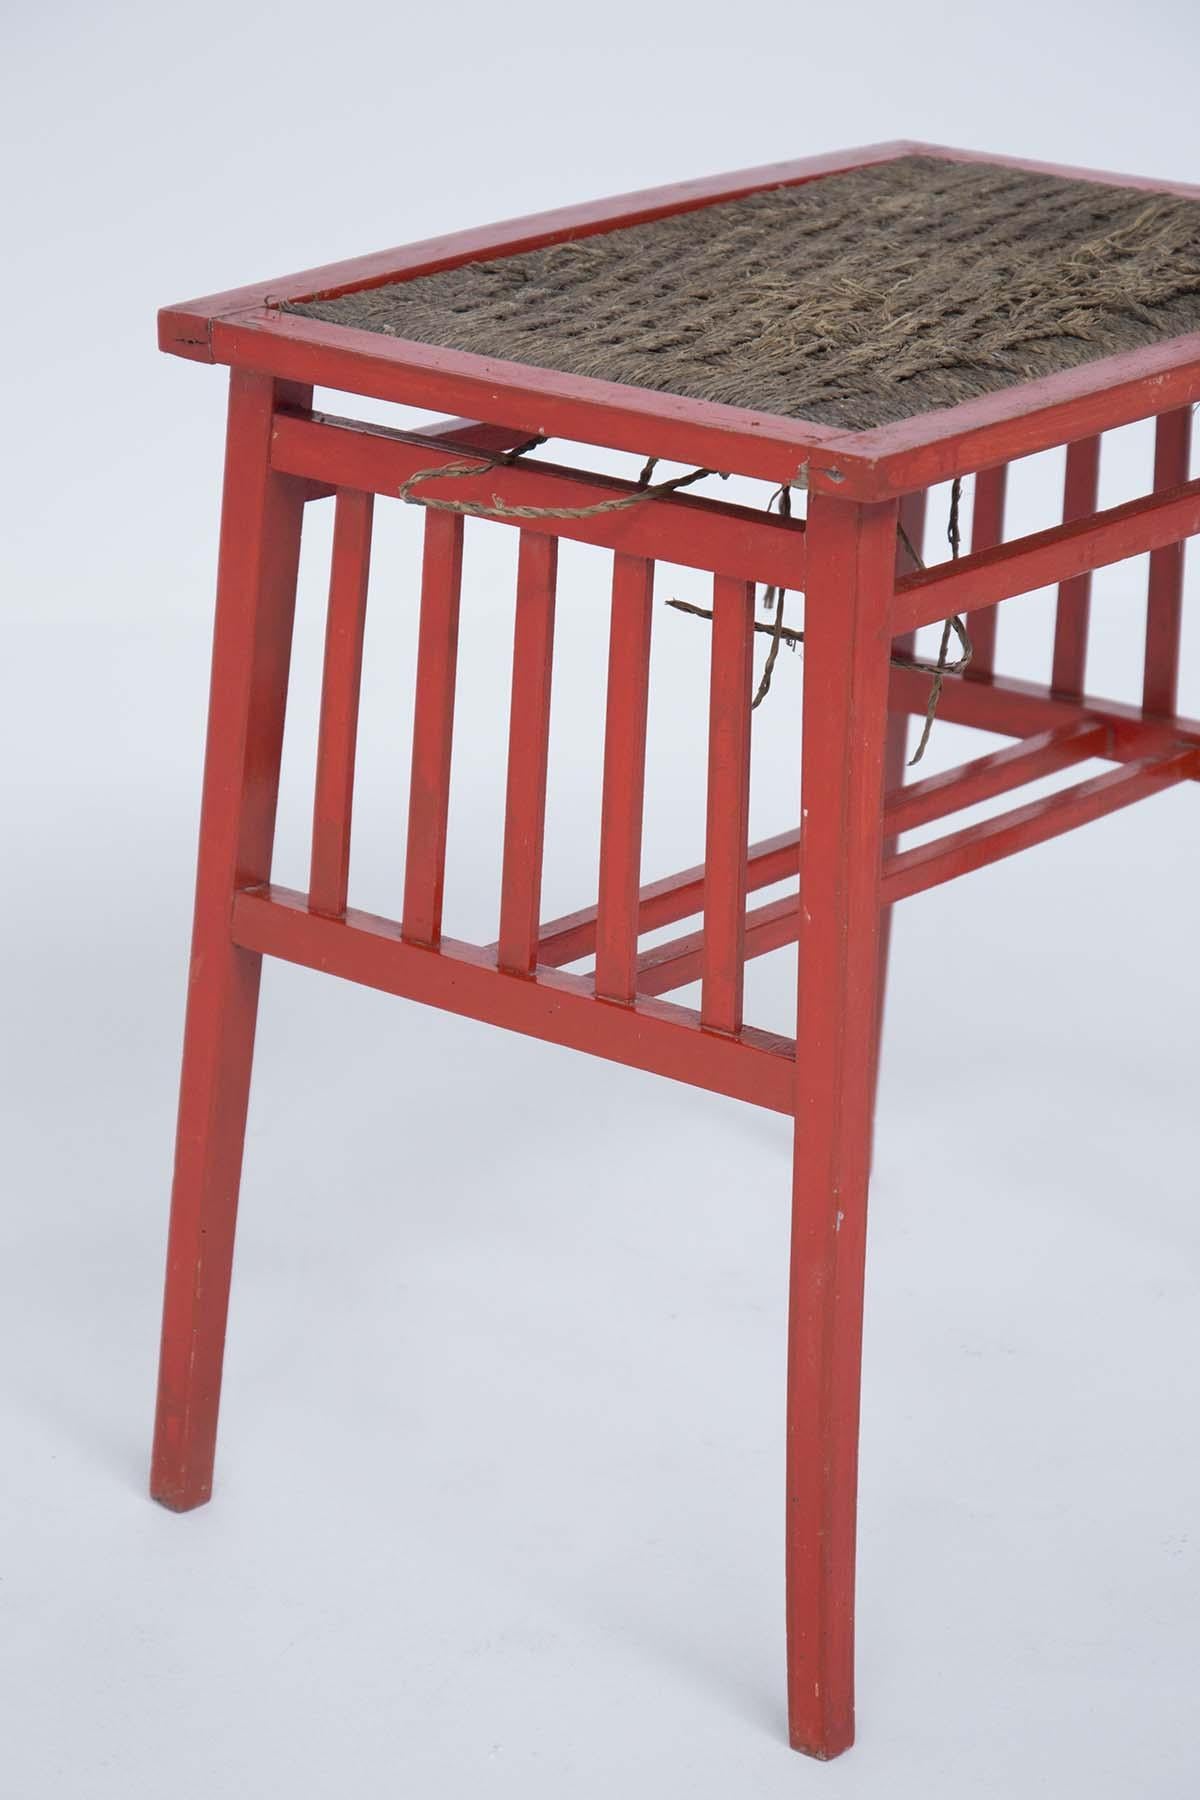 Wooden coffee table painted in the style of Ettore Sottsass designed in the 1950s. 
The frame is made of red painted wood and has four legs. The top is made of woven rope. The seat is embroidered with a row of five wooden rods. The wooden coffee